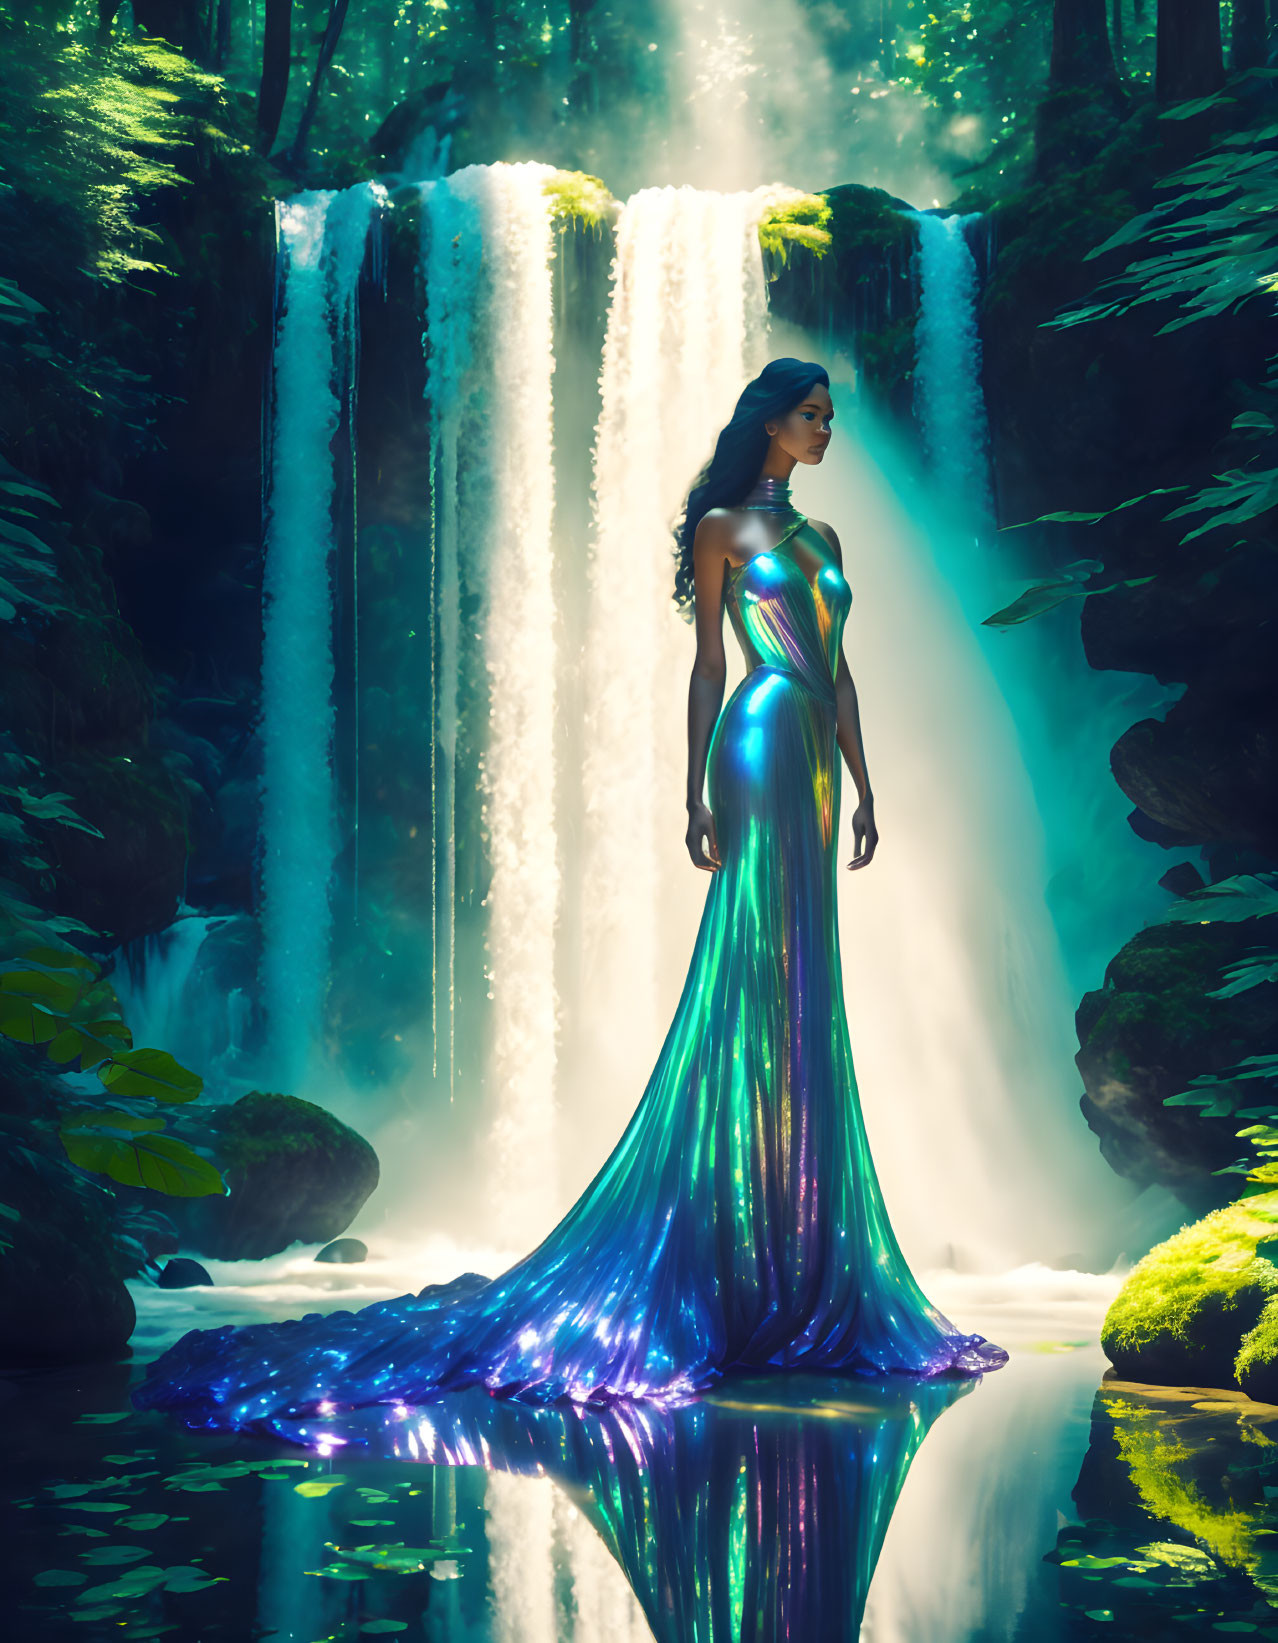 Woman in iridescent dress near glowing waterfall in serene forest